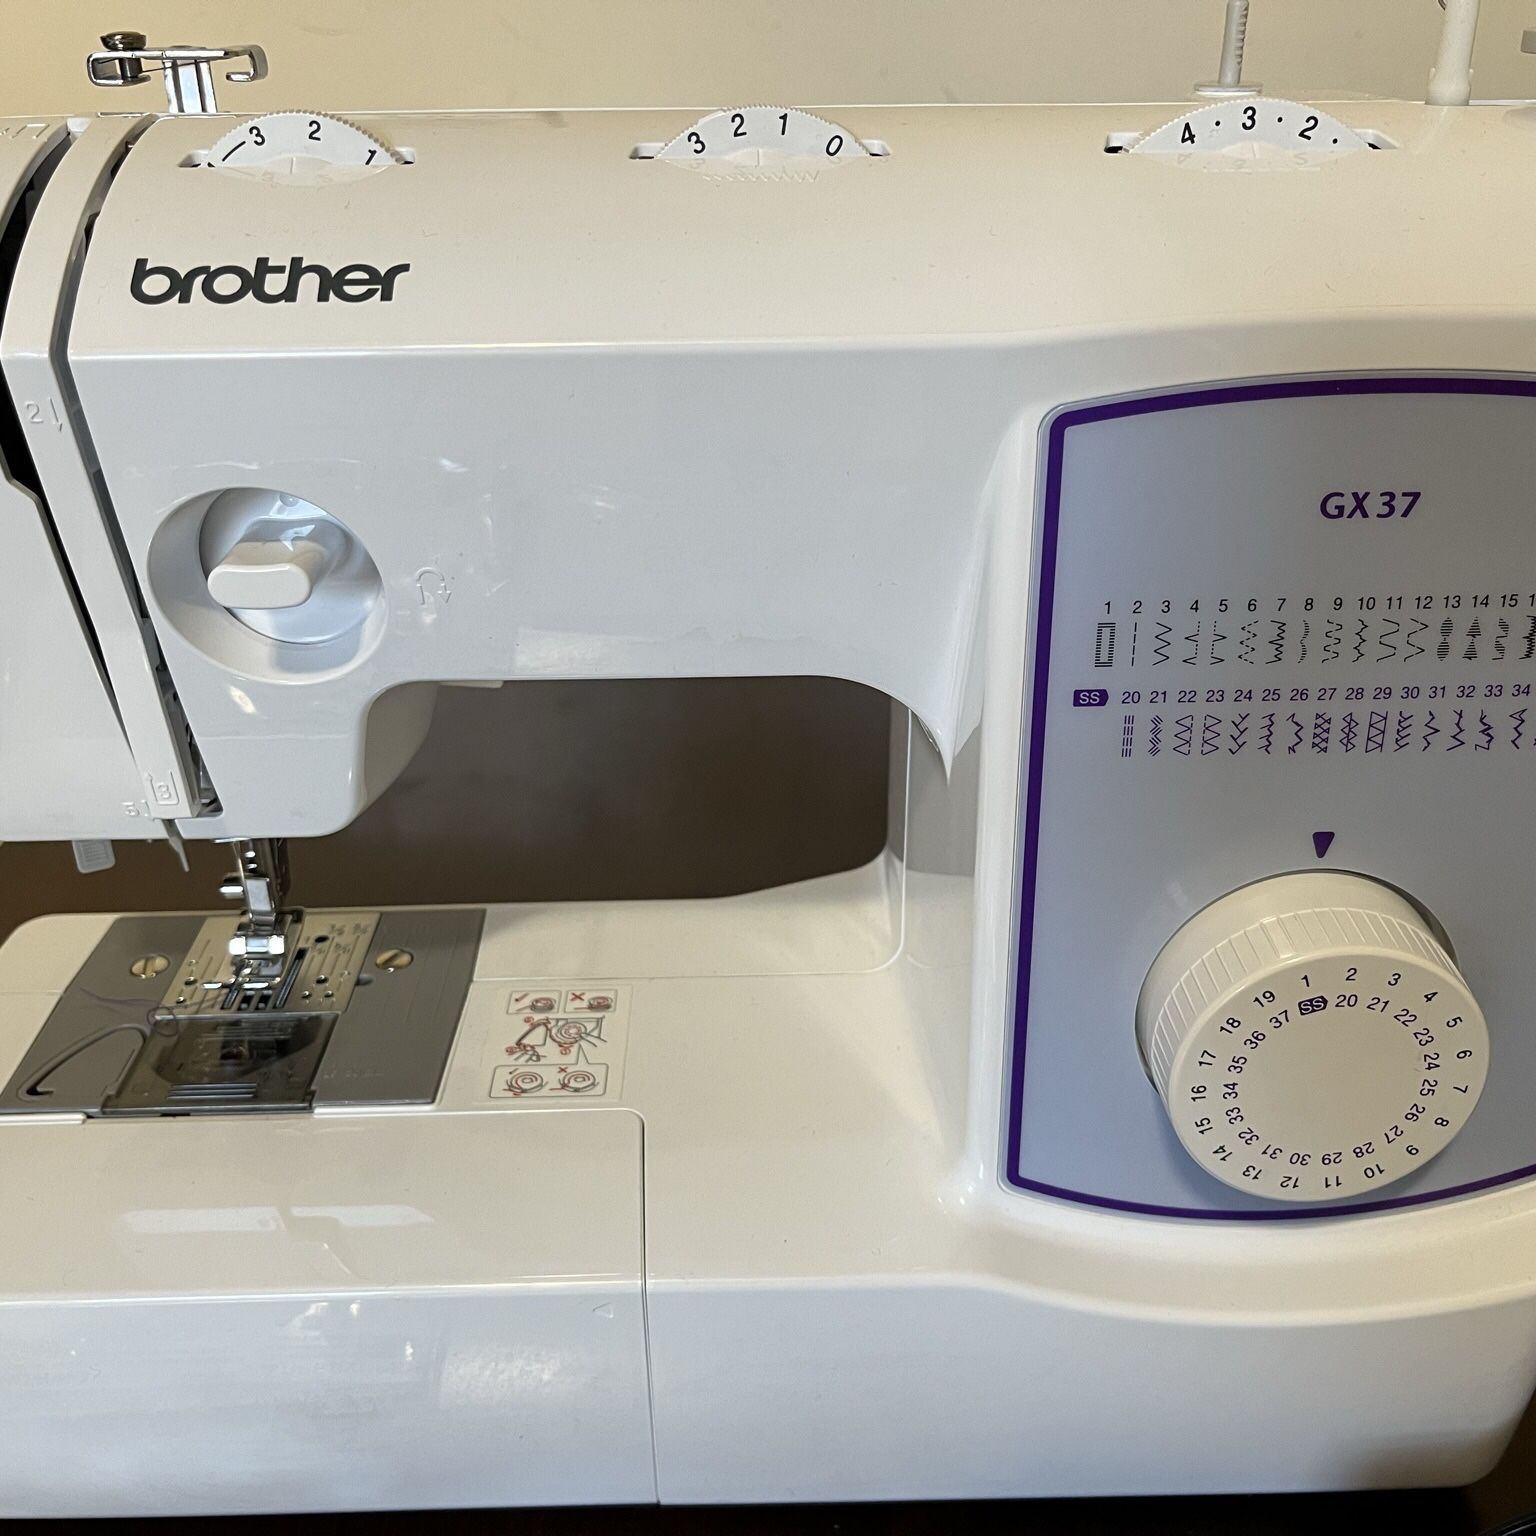 Brother Sewing Machine GX37 for Sale in West New York, NJ - OfferUp